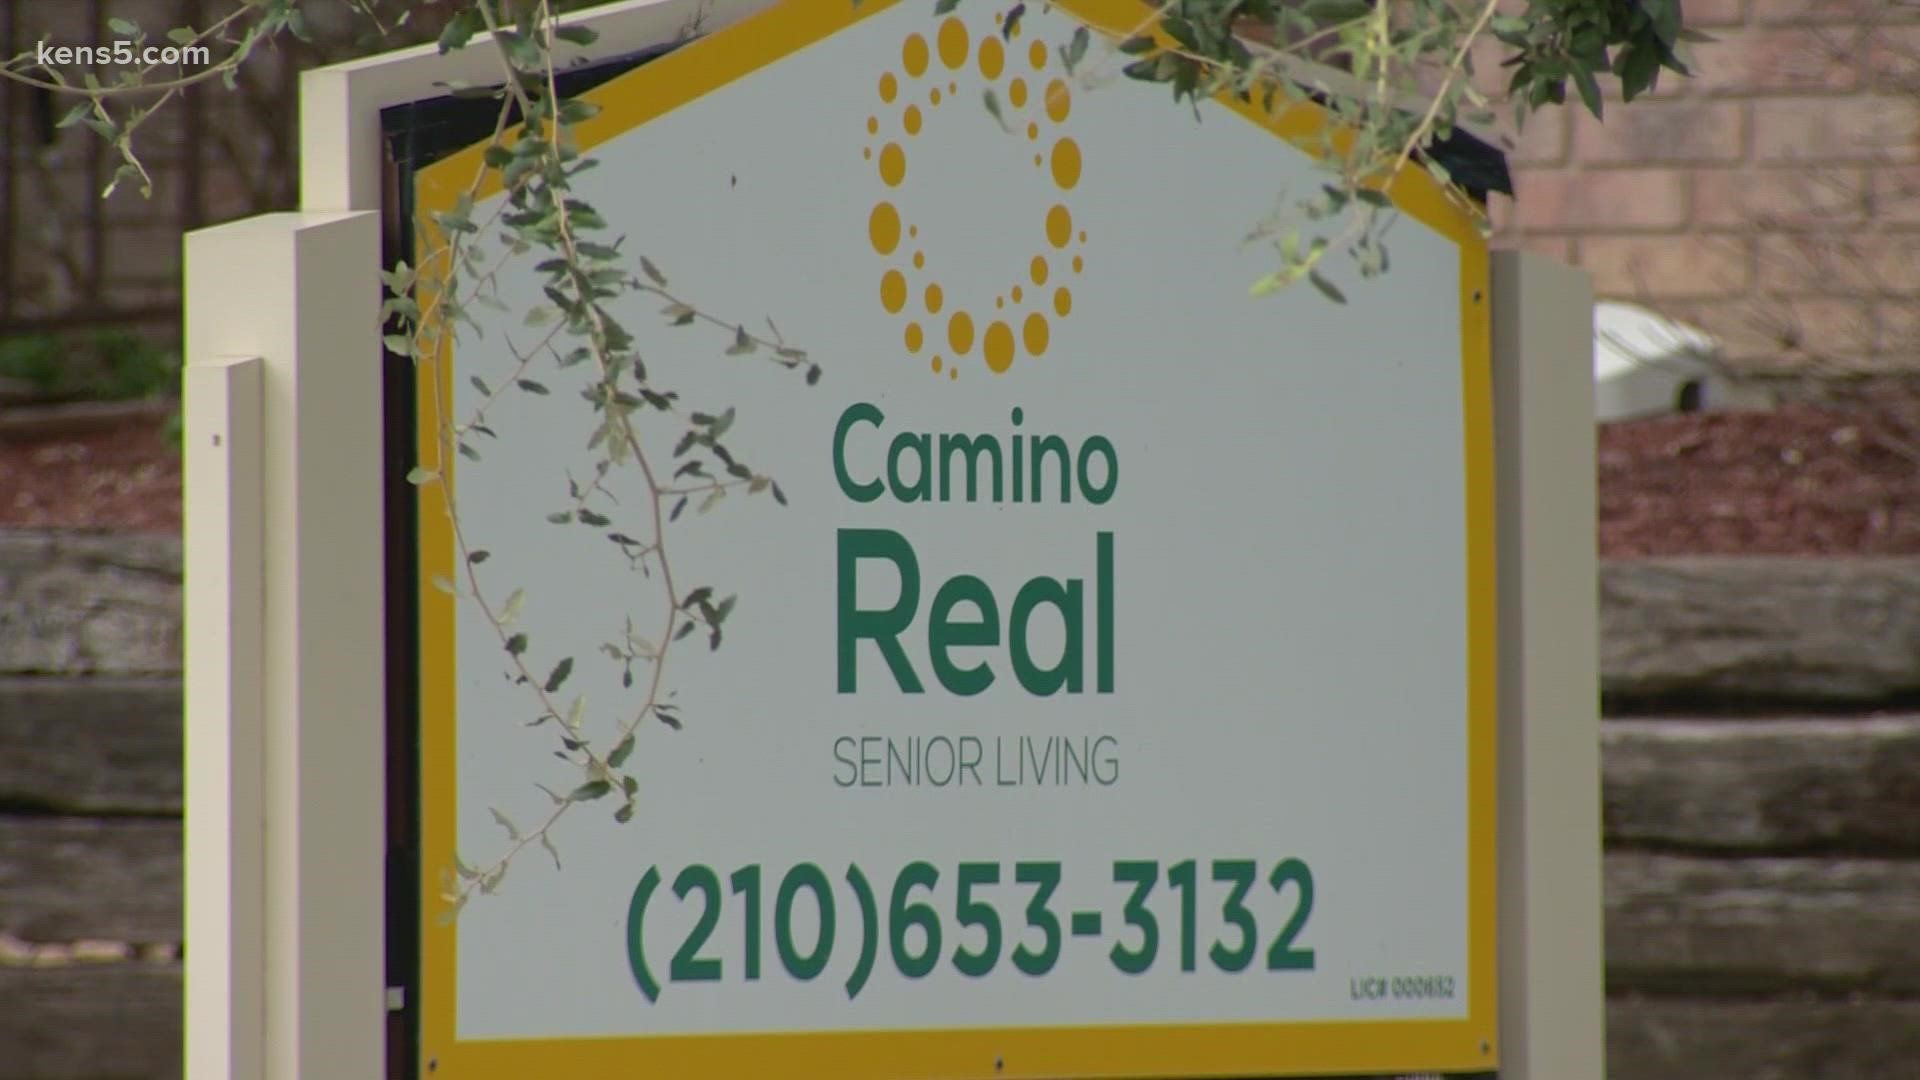 A local man says the neglect has been going on for months at the Camino Real Senior Assisted Living facility. He says he has reported the issue multiple times.